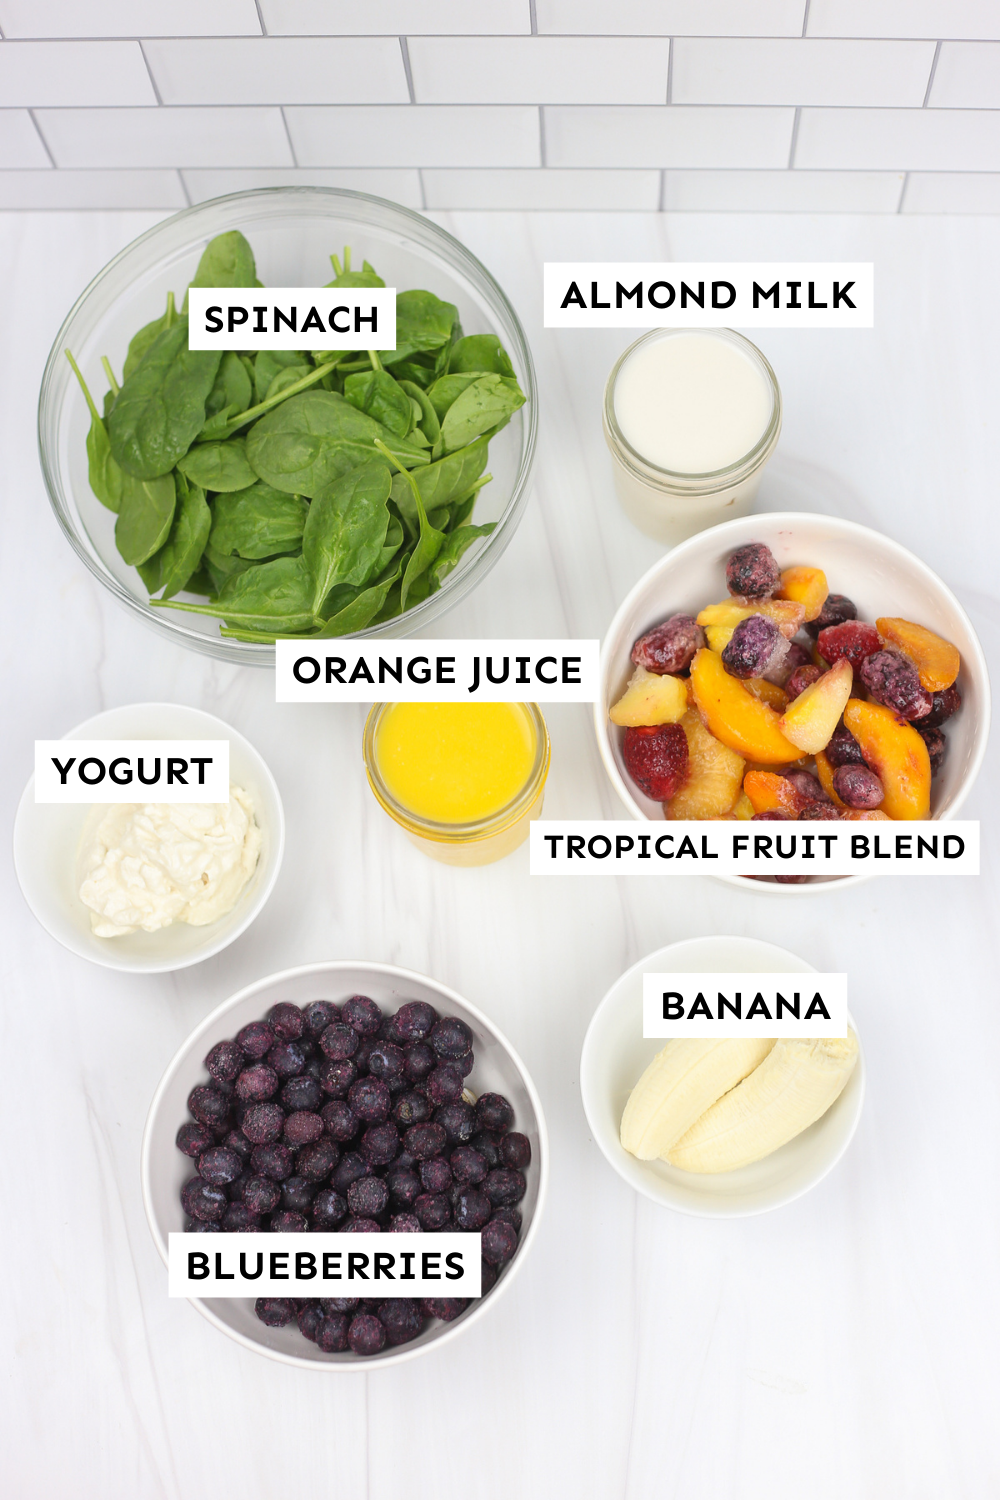 Labeled ingredients for Thriving Home's Everyday Smoothie recipe.